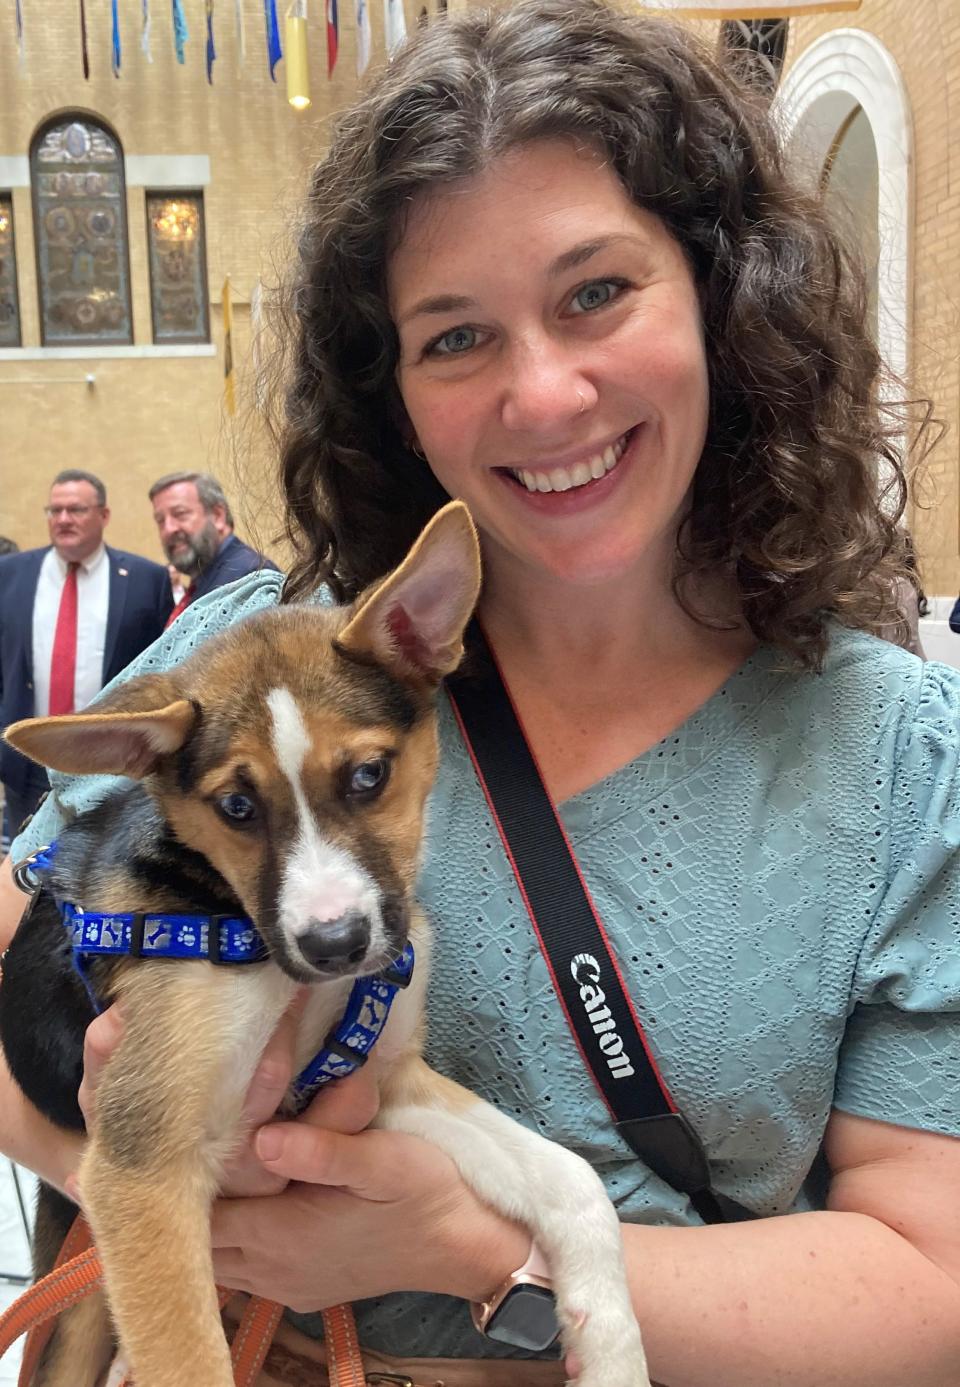 Luna, tired after a morning of greeting strangers Tuesday at Animal Advocacy Day at the State House, takes a break with animal advocate Diana Lee of the MSPCA.